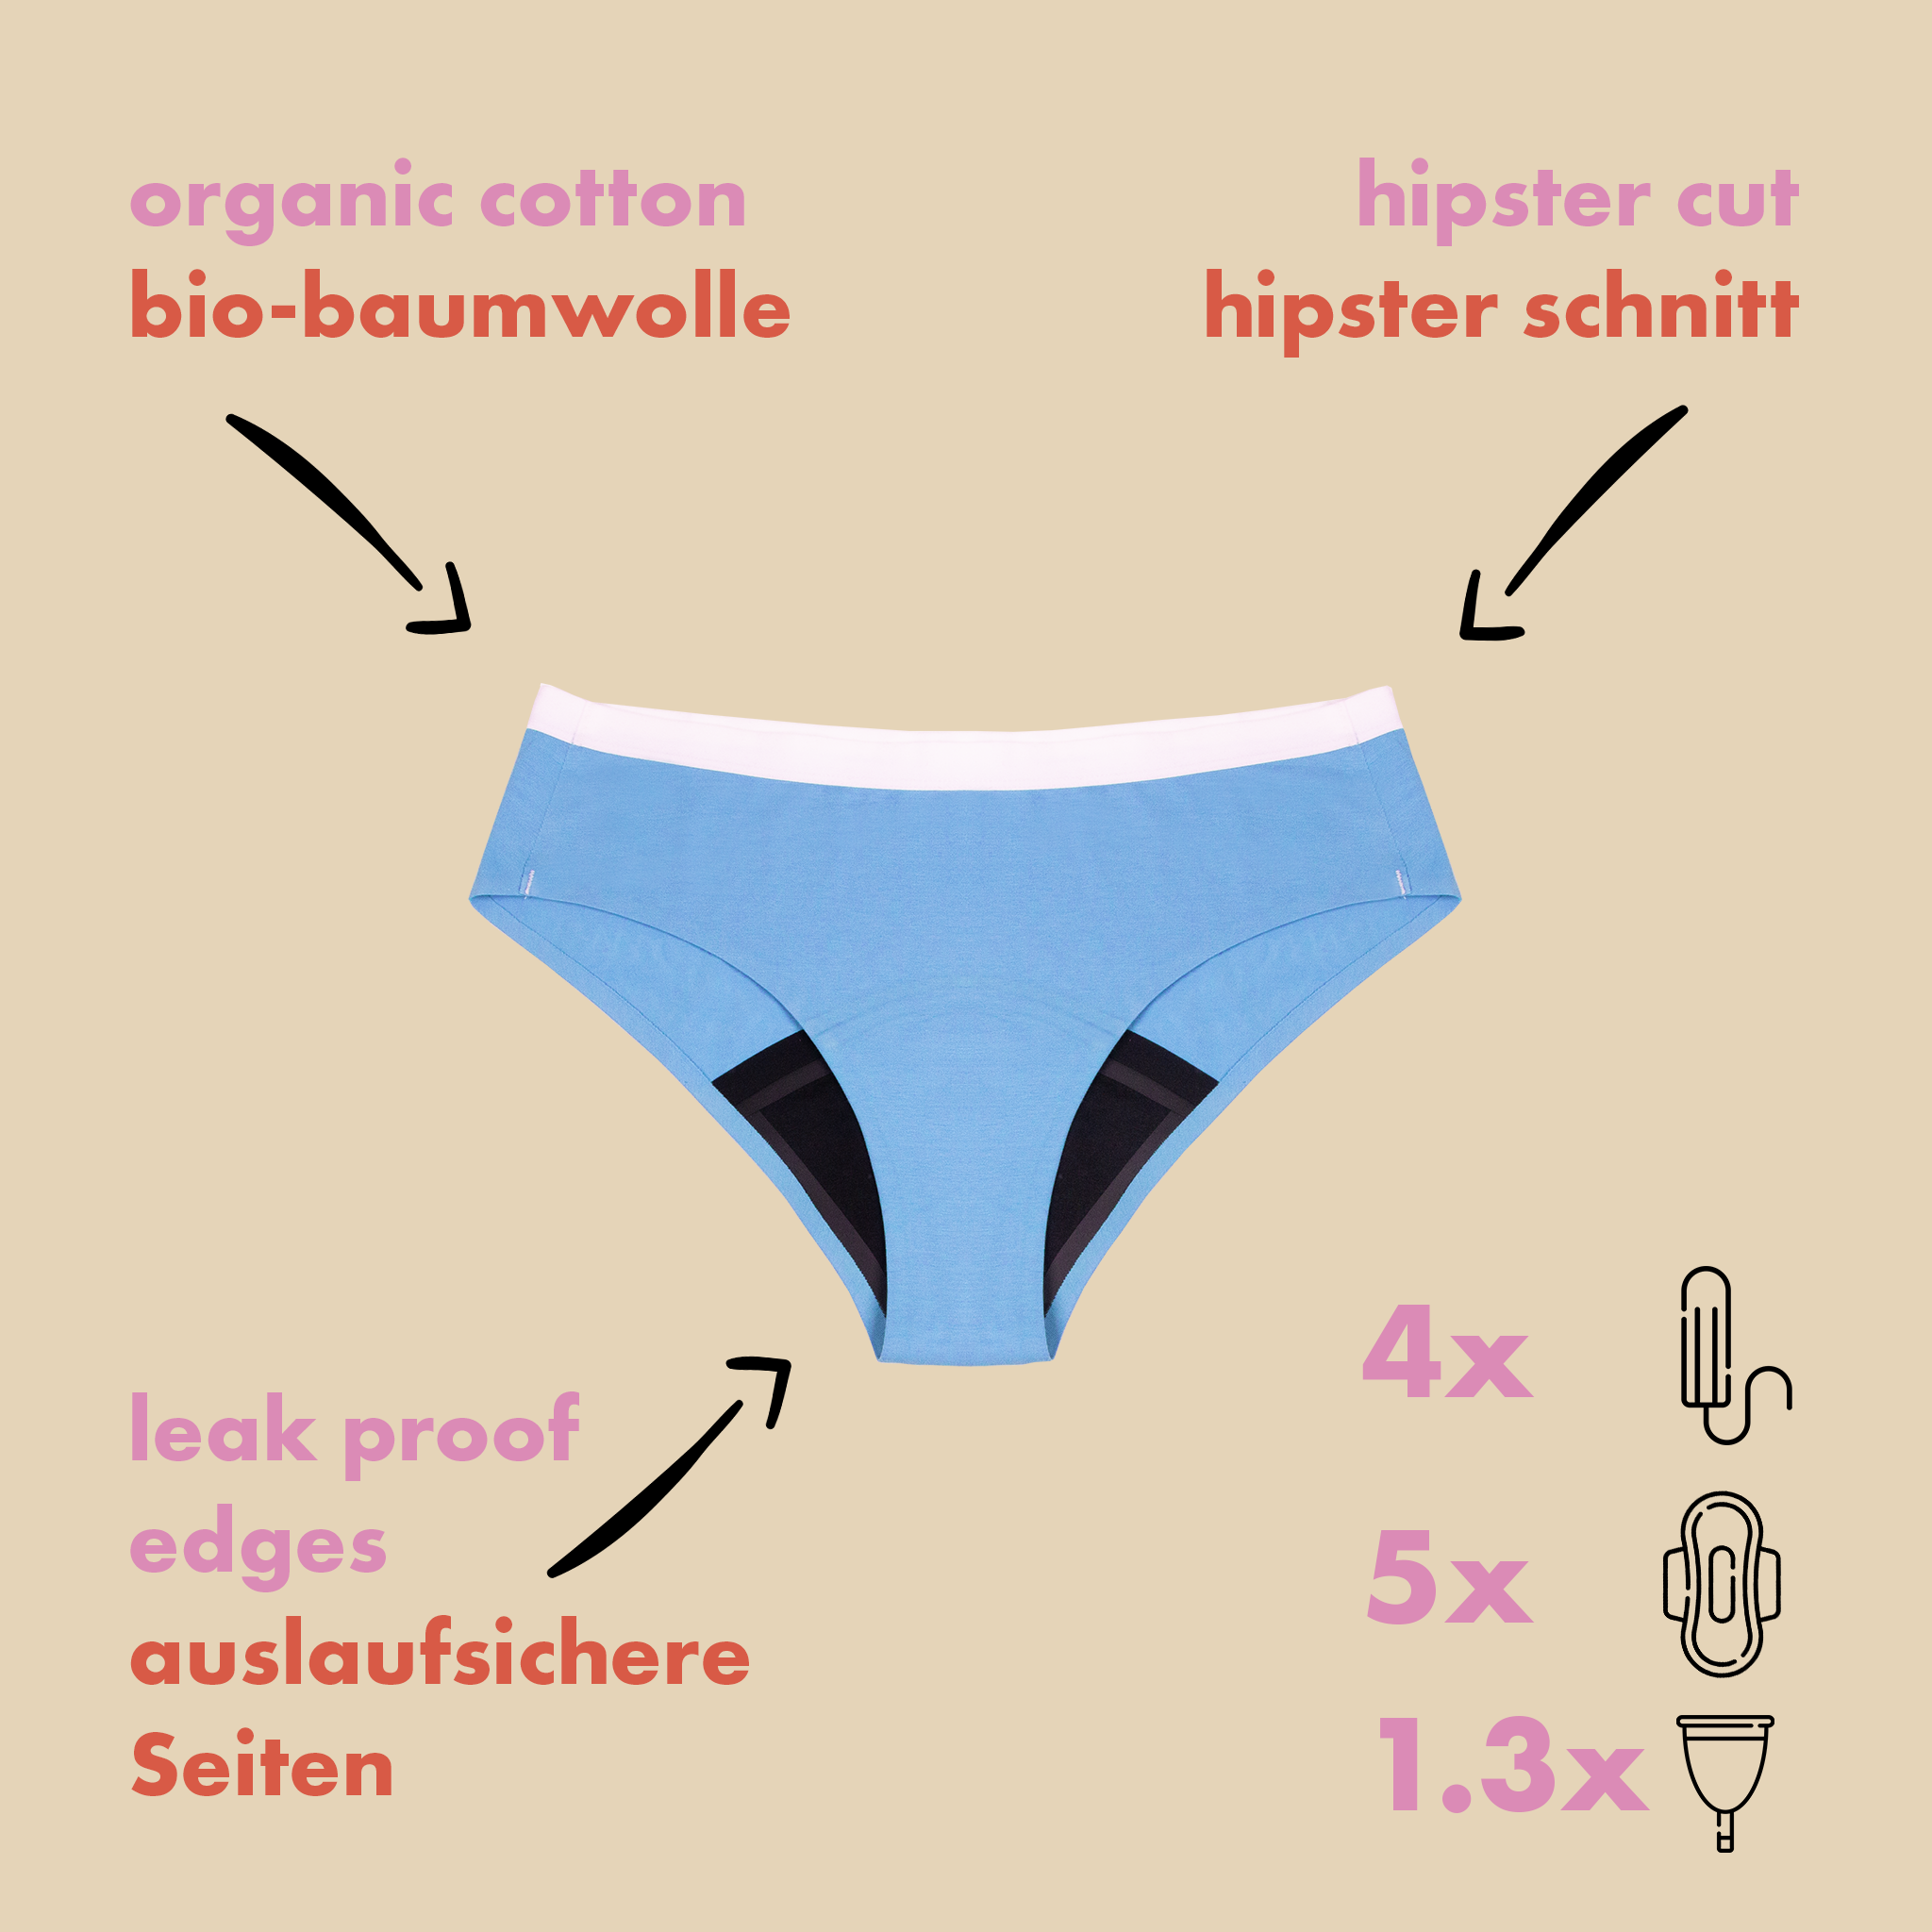 dais Period Underwear in hipster cut designed for teens showing all the benefits including organic cotton, leak proof edges and super absorbency up to 4 tampons